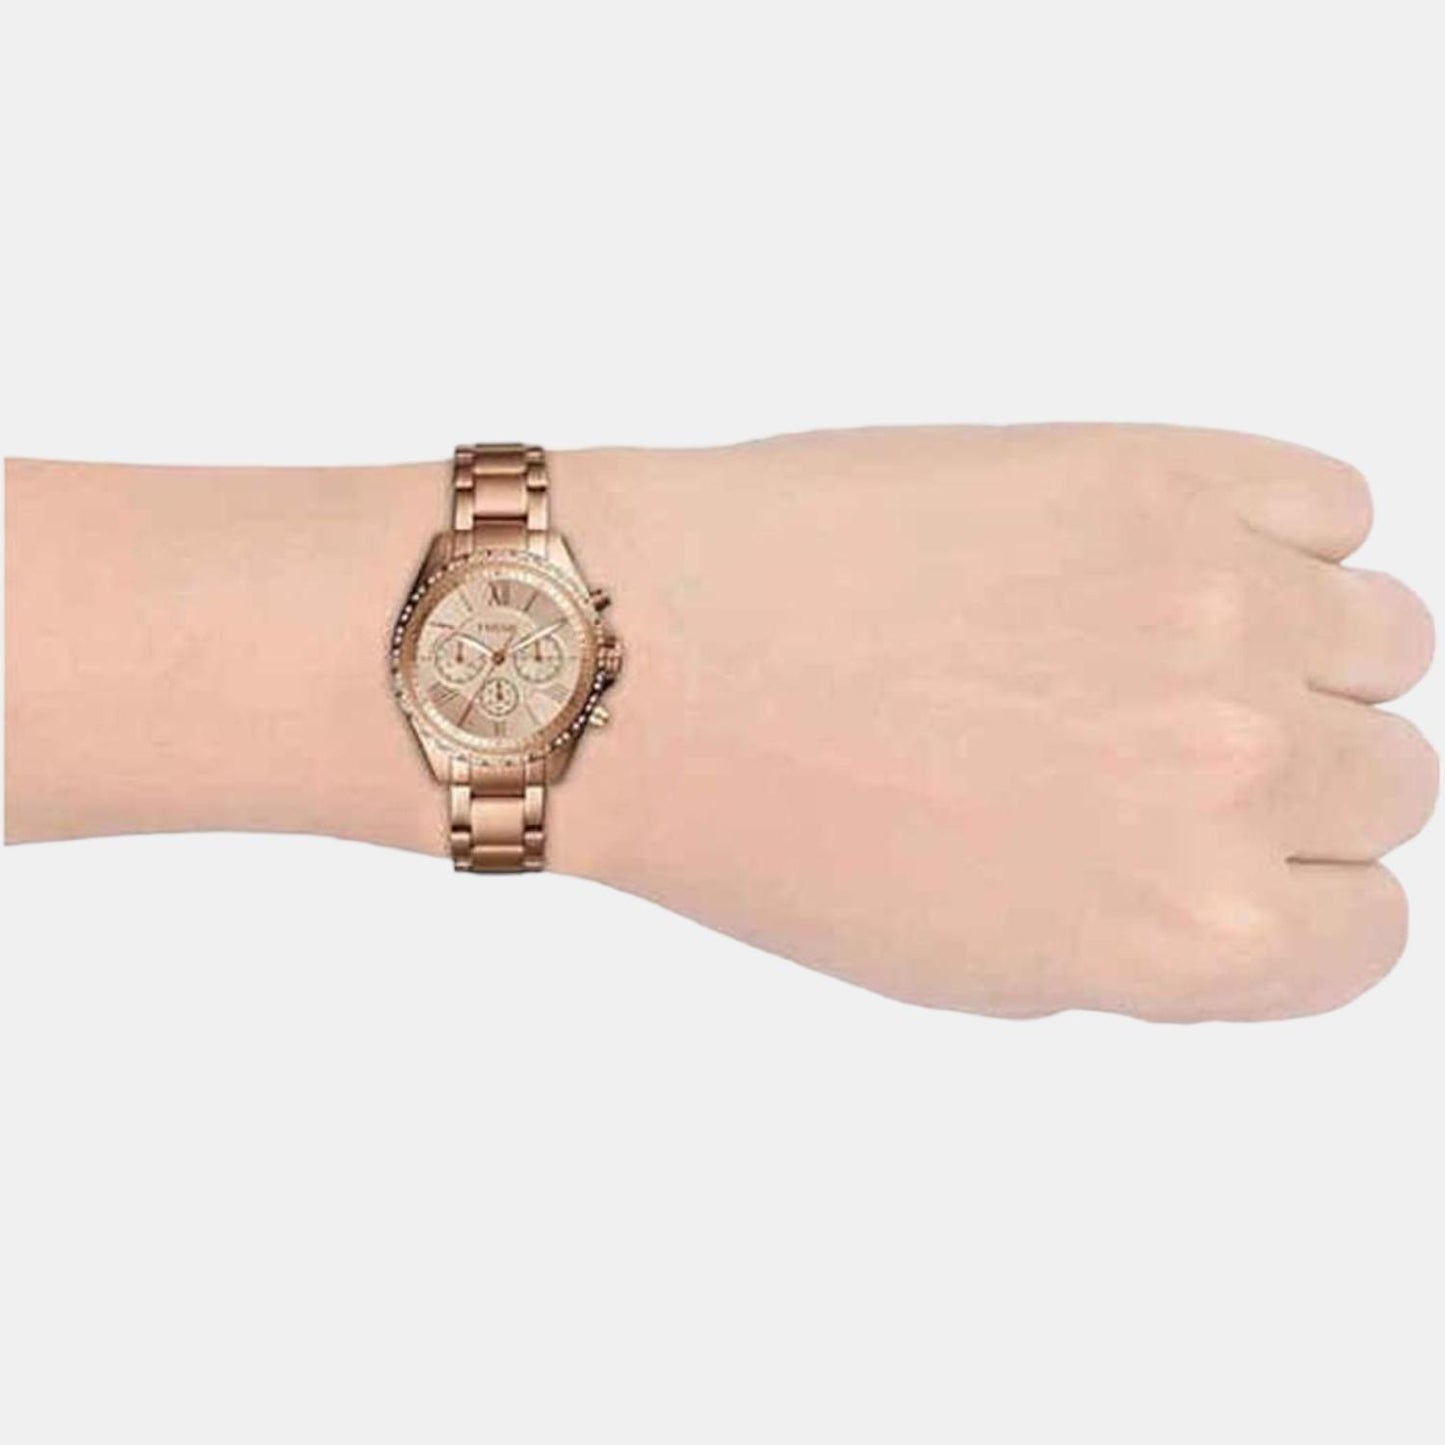 Female Rose Gold Stainless Steel Chronograph Watch BQ3377